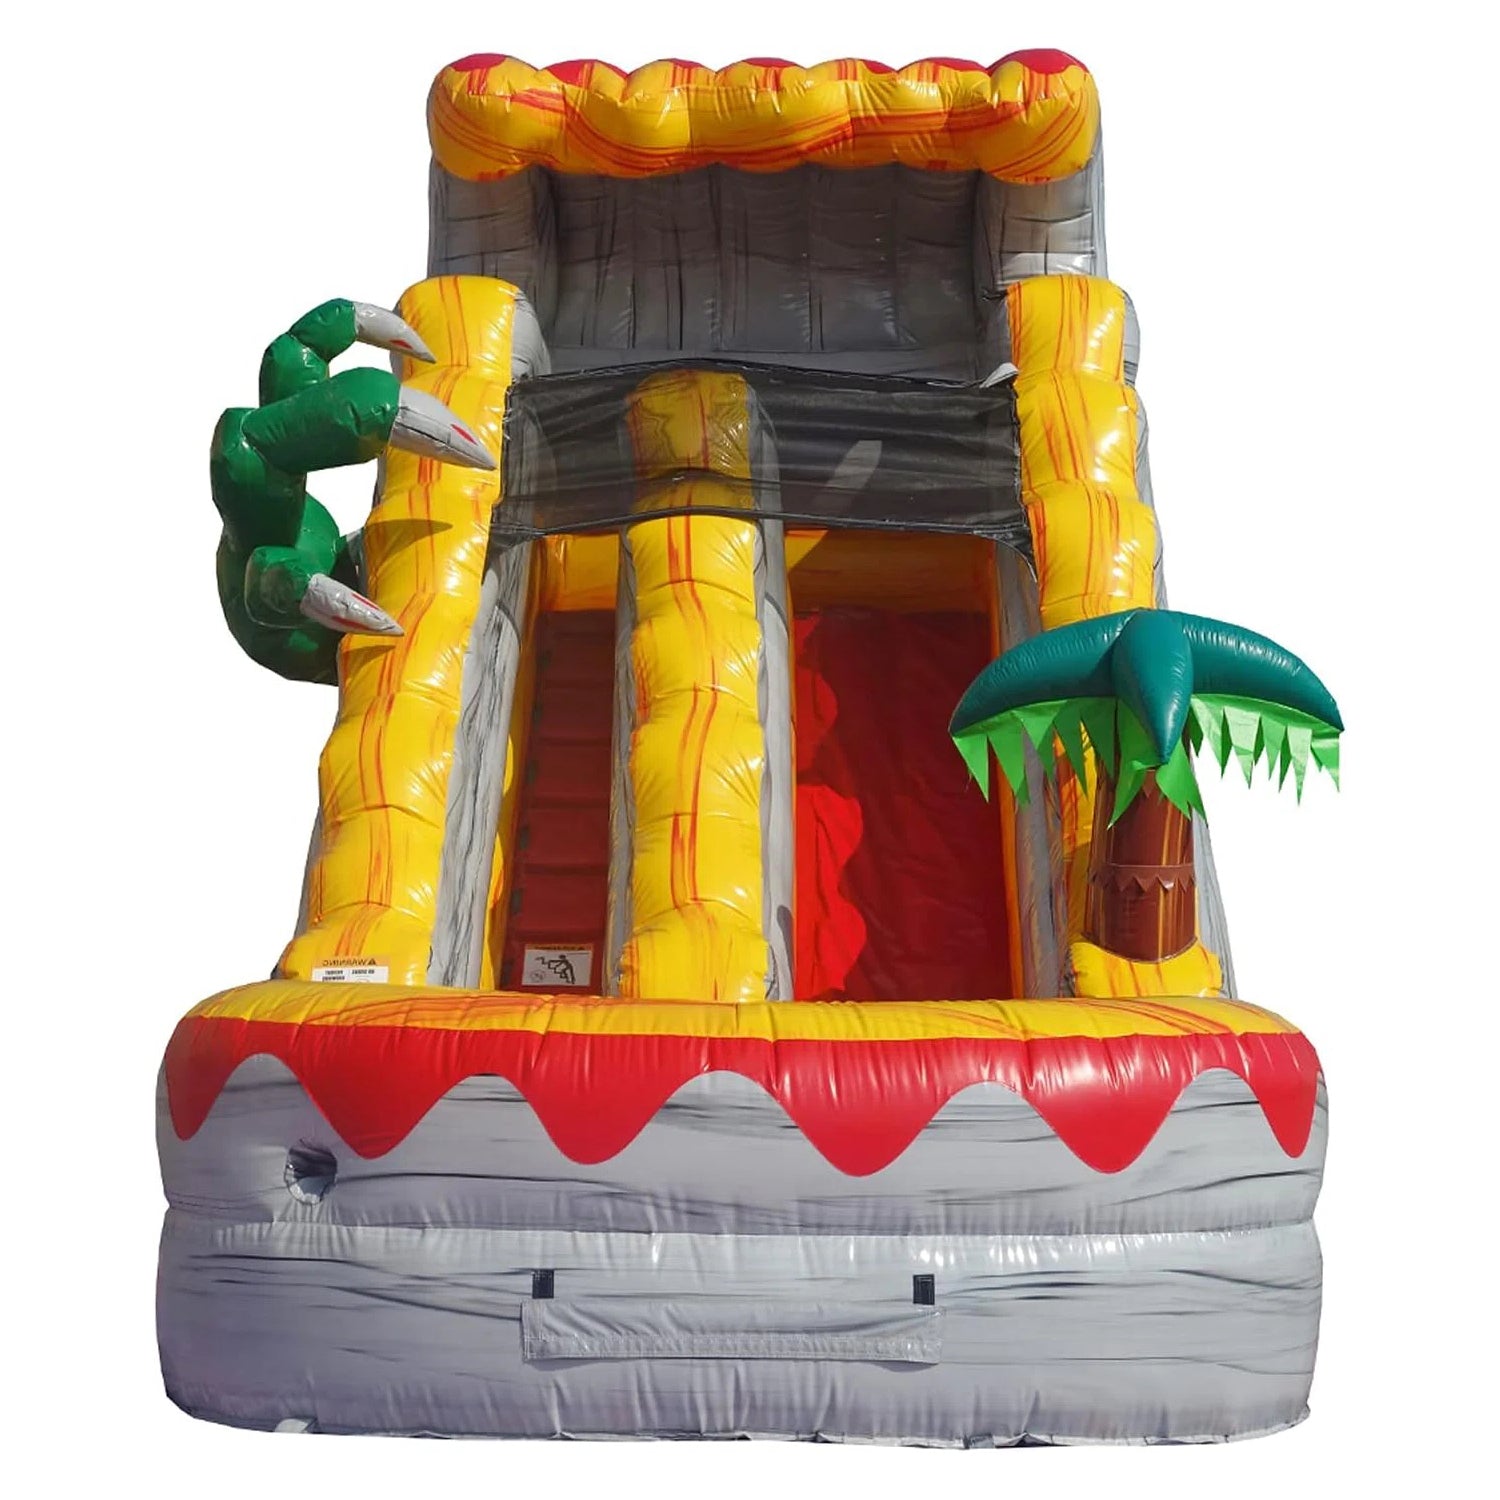 T-Rex Commercial Grade Water Slide With Splash Pool Giant Inflatable Water Slide For Adults